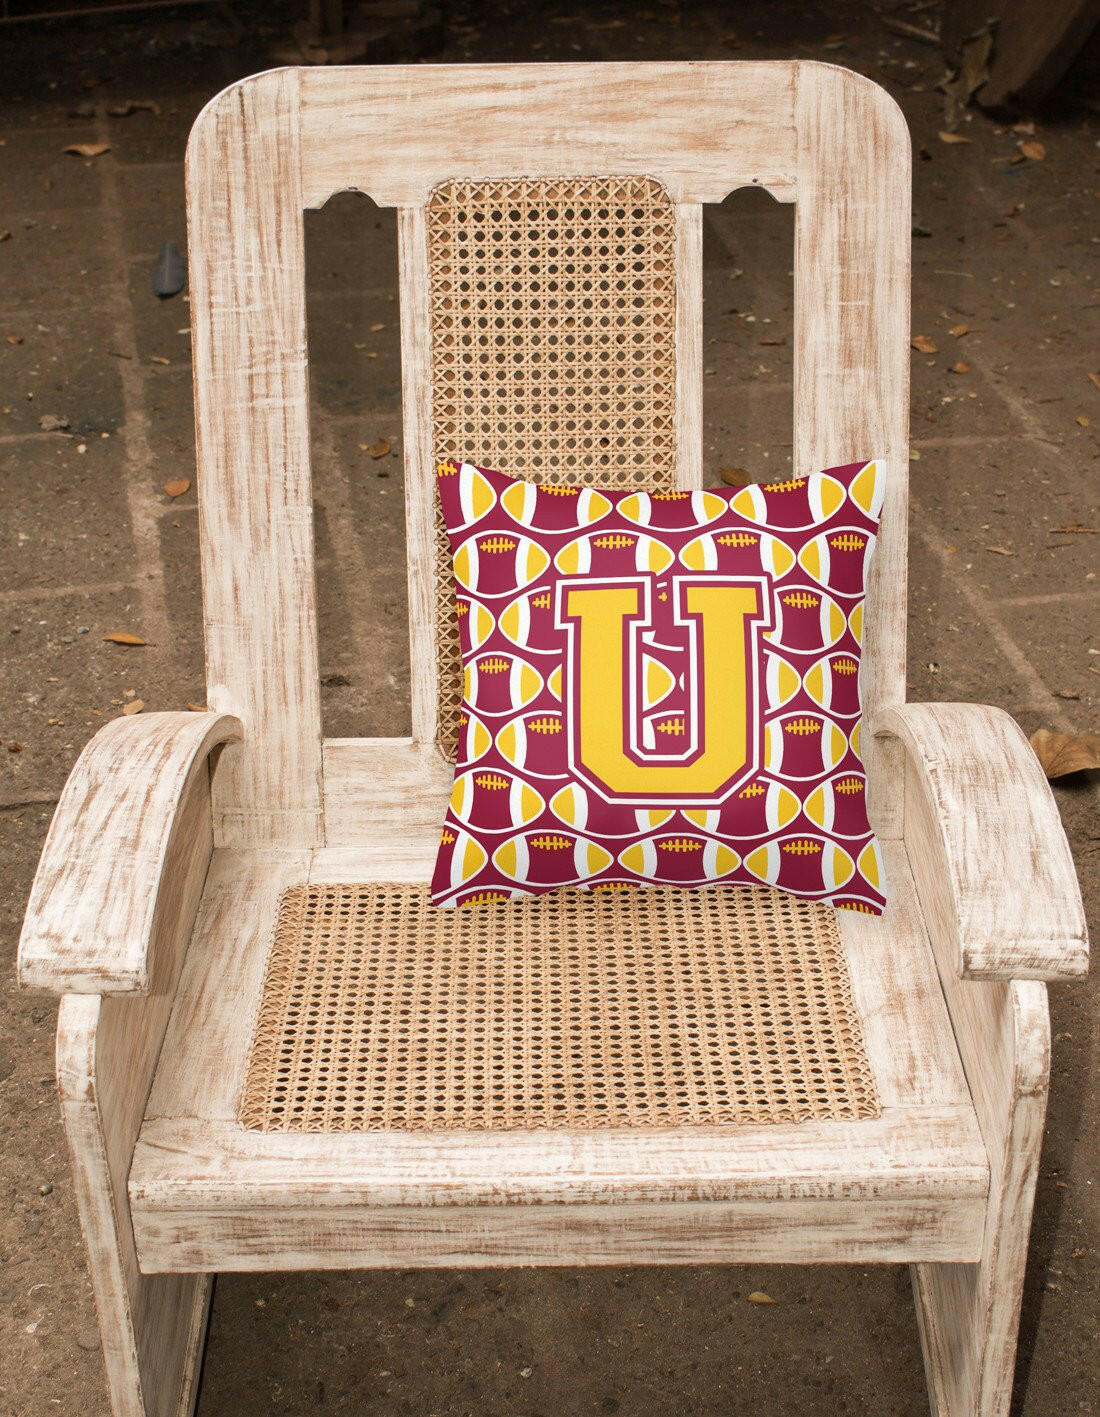 Letter U Football Maroon and Gold Fabric Decorative Pillow CJ1081-UPW1414 by Caroline's Treasures